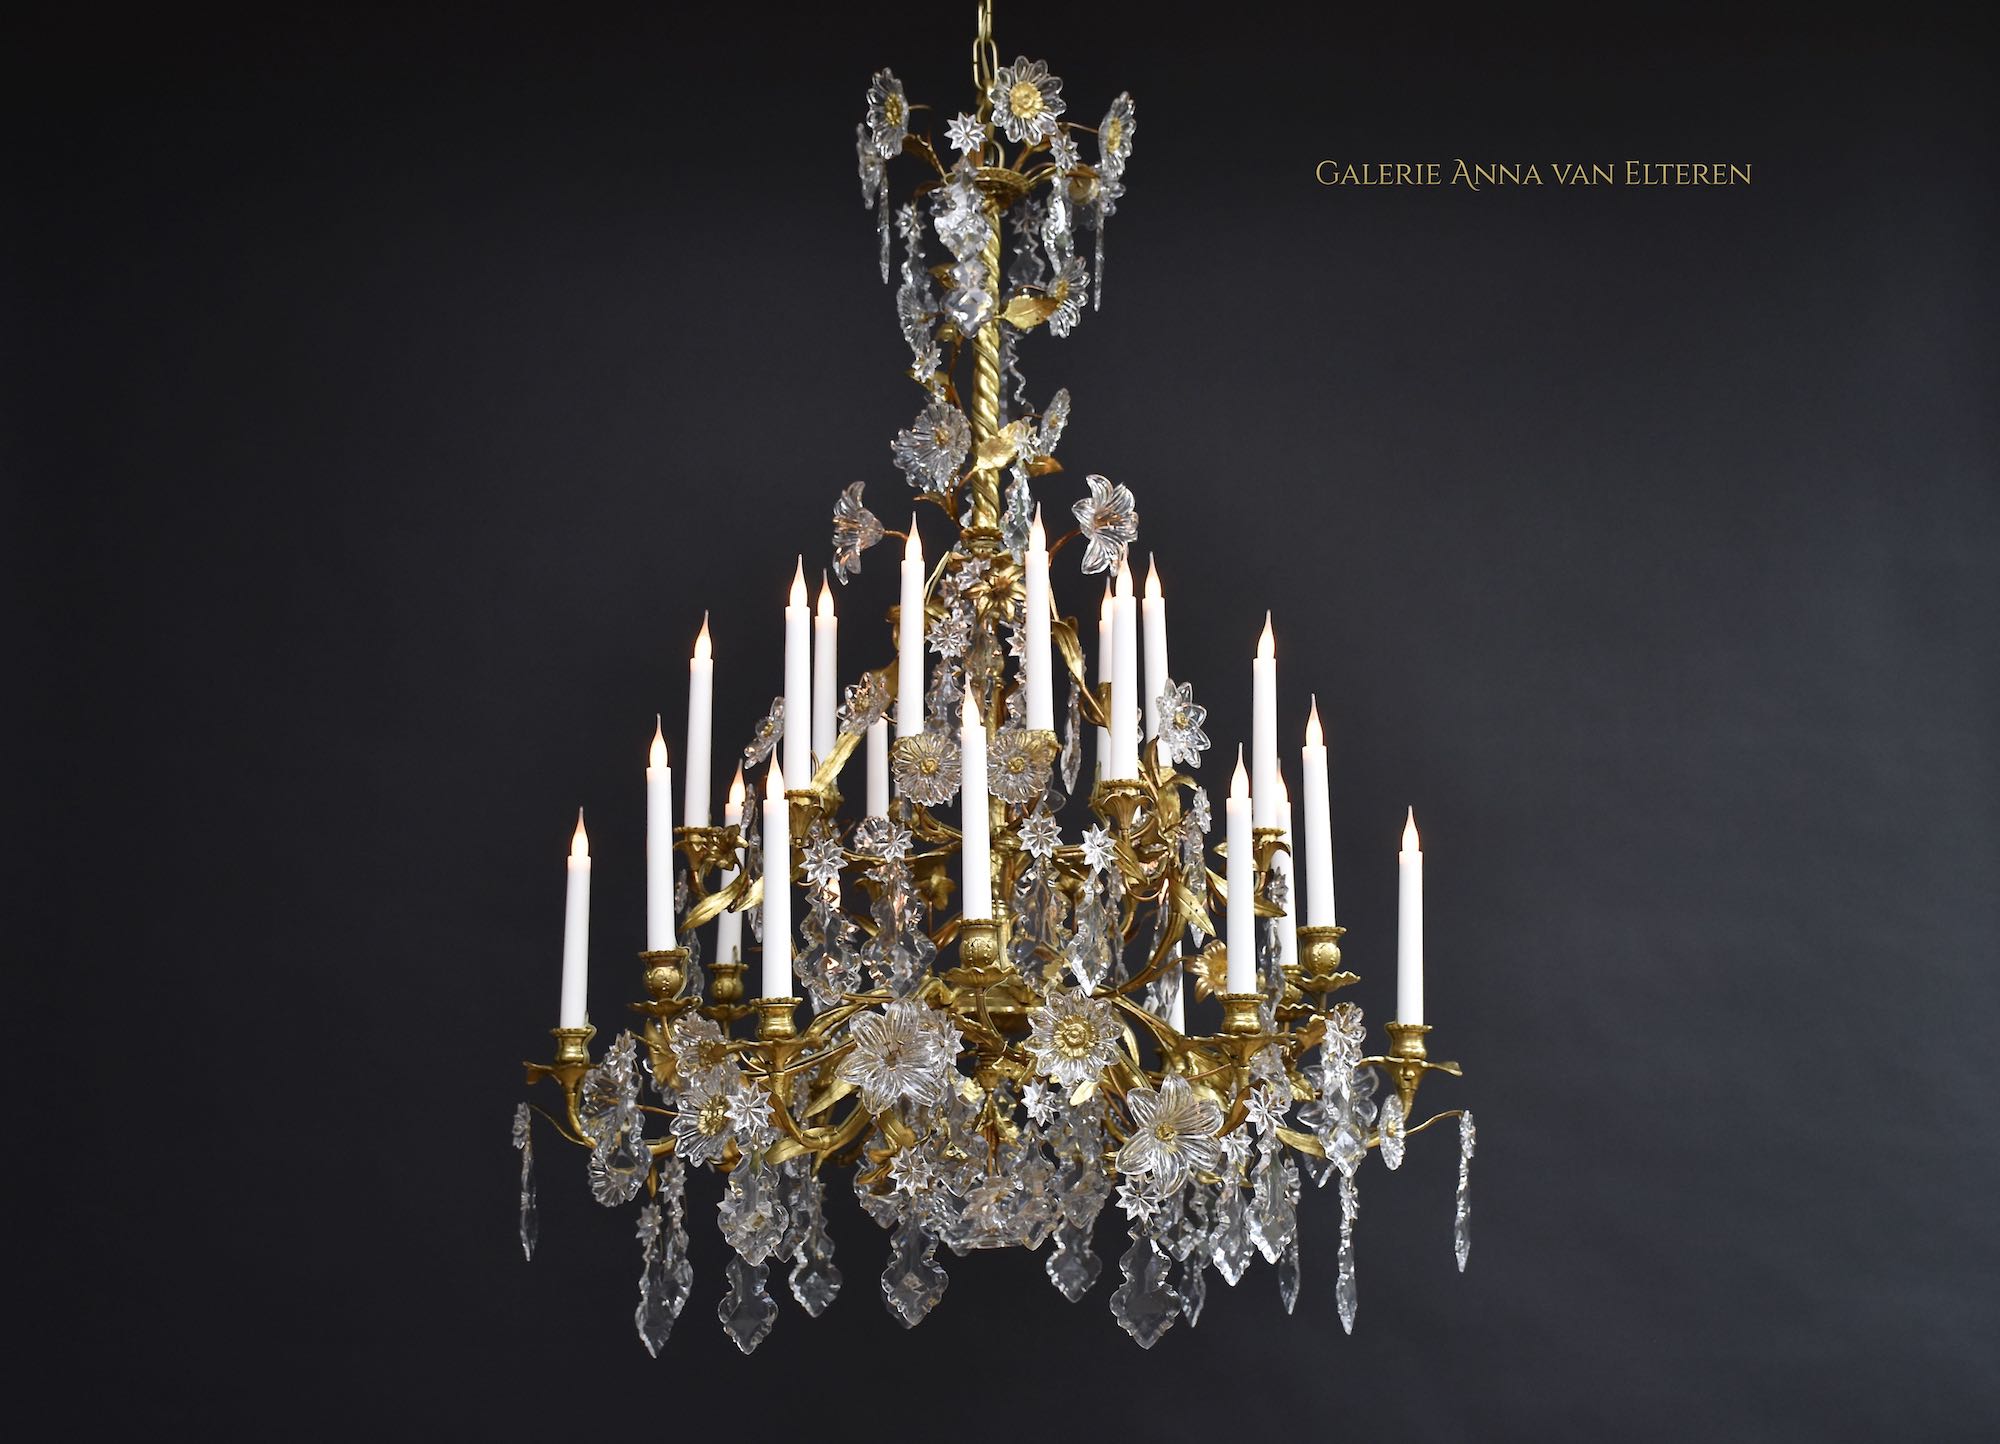 19th century large French floral chandelier with Baccarat crystals